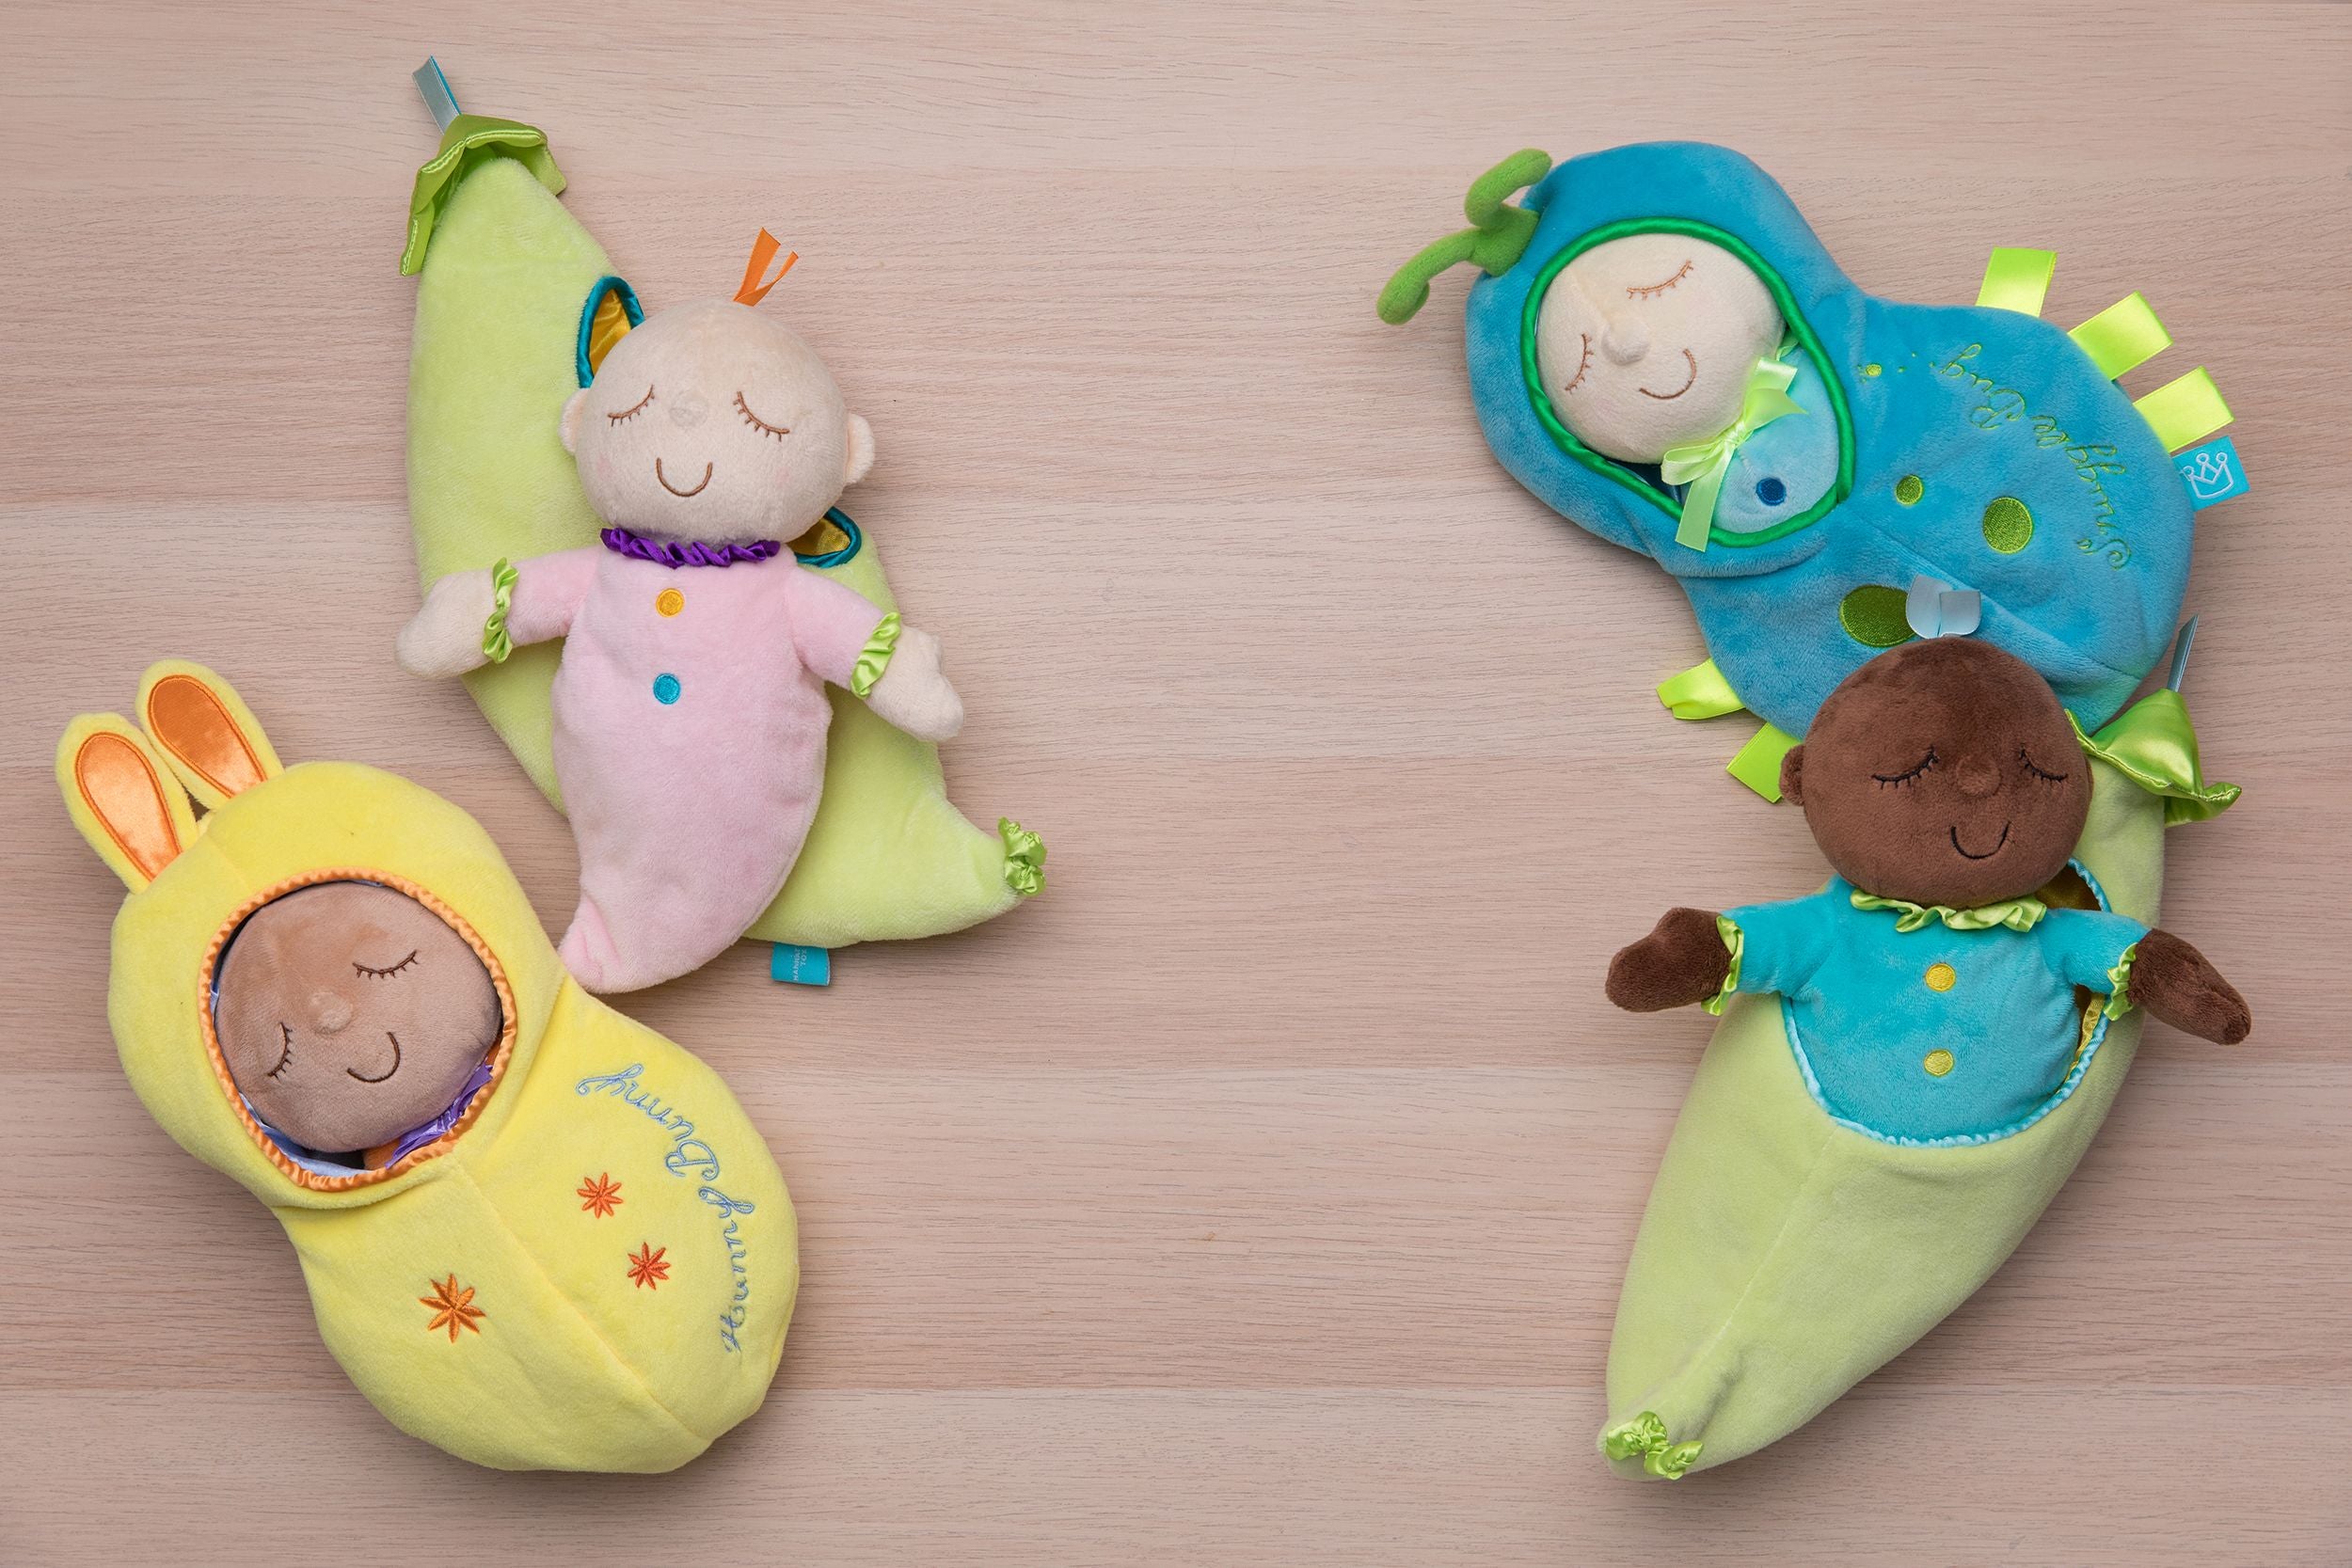 Four snuggle pod dolls laid on a wood floor backdrop. Soft dolls each have their own fabric pods that they tuck inside.